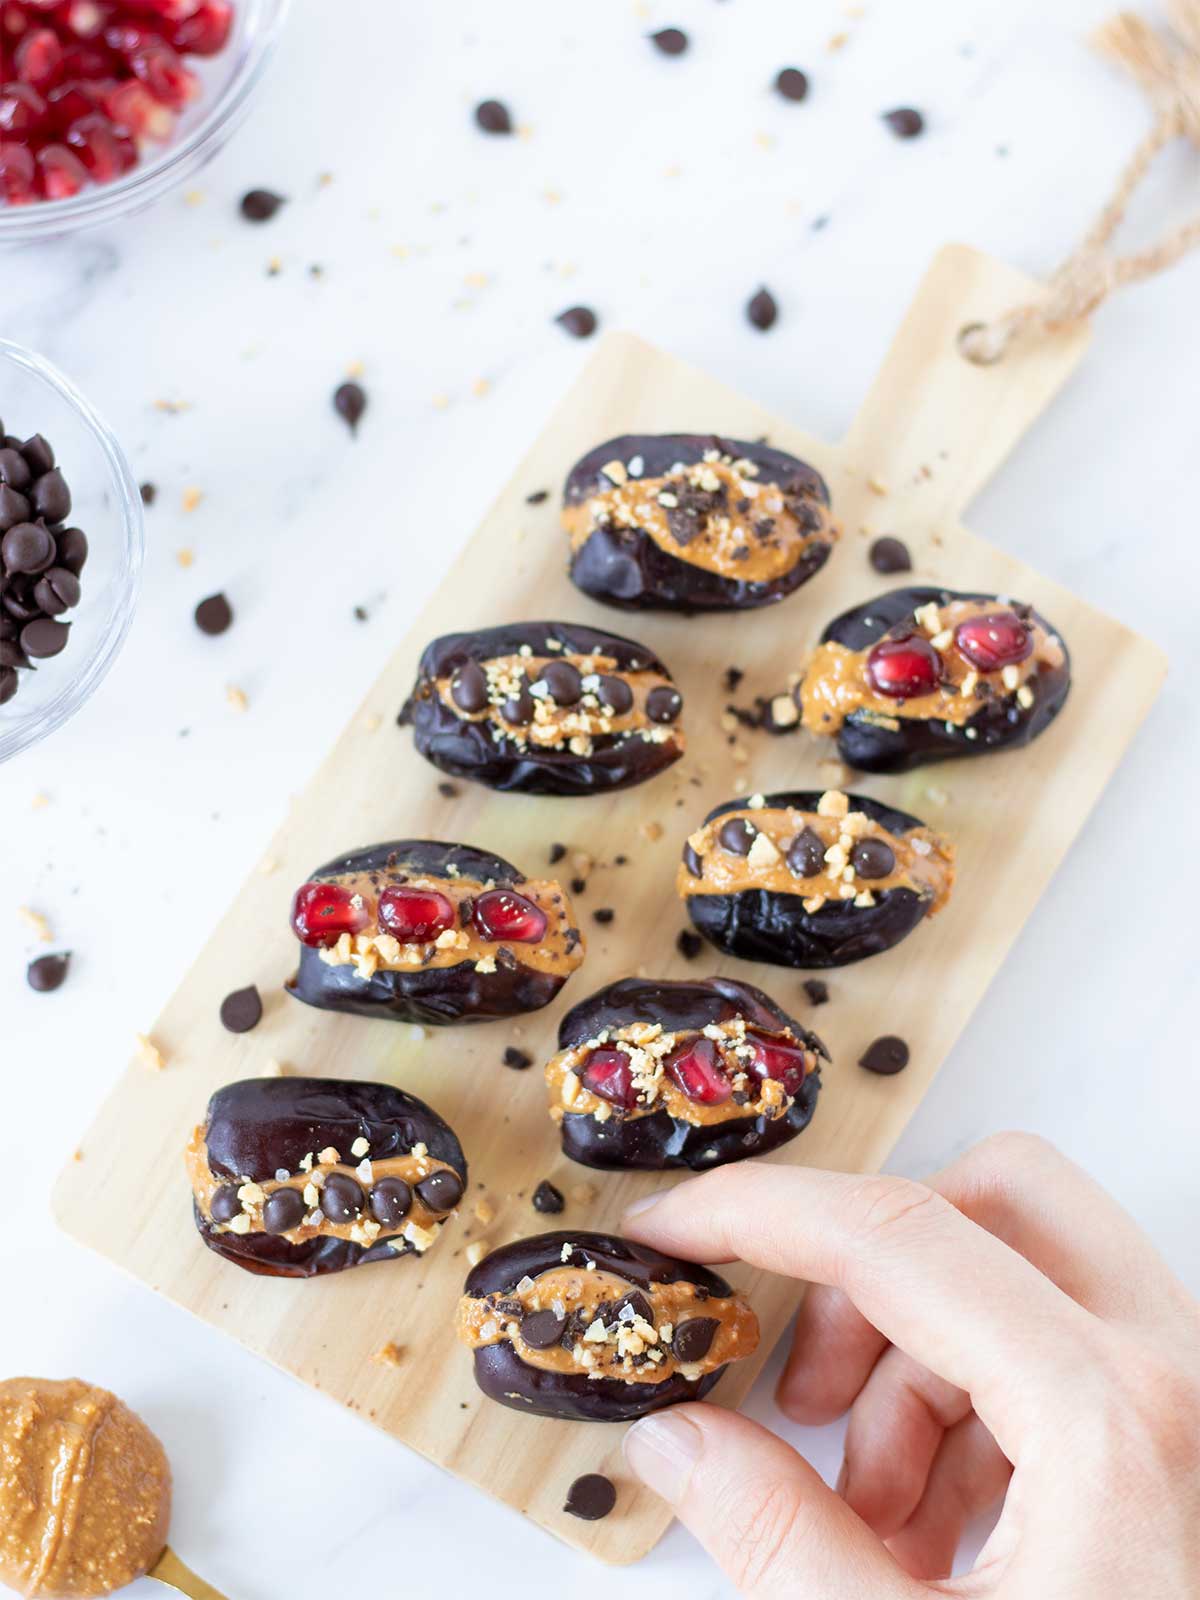 Soft and chewy dates stuffed with homemade peanut butter on small wooden board topped with chocolate chips, chopped dark chocolate, and pomegranate seeds